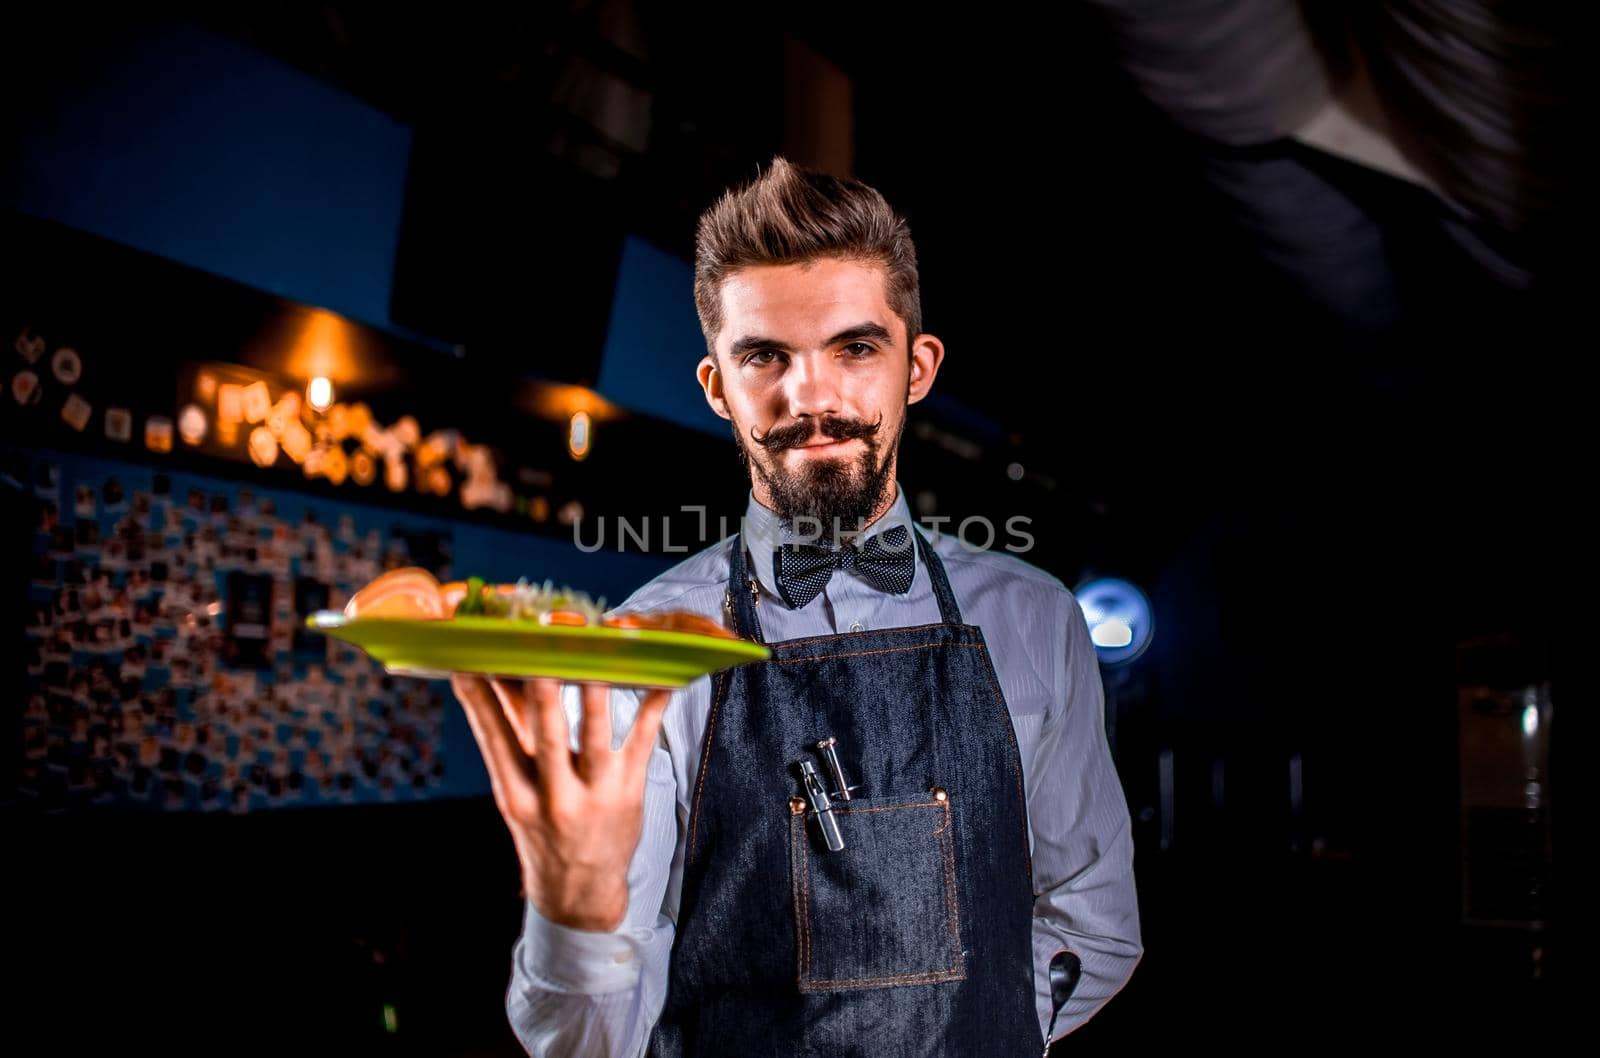 Young restaurant employee carries salad in the restaurant.